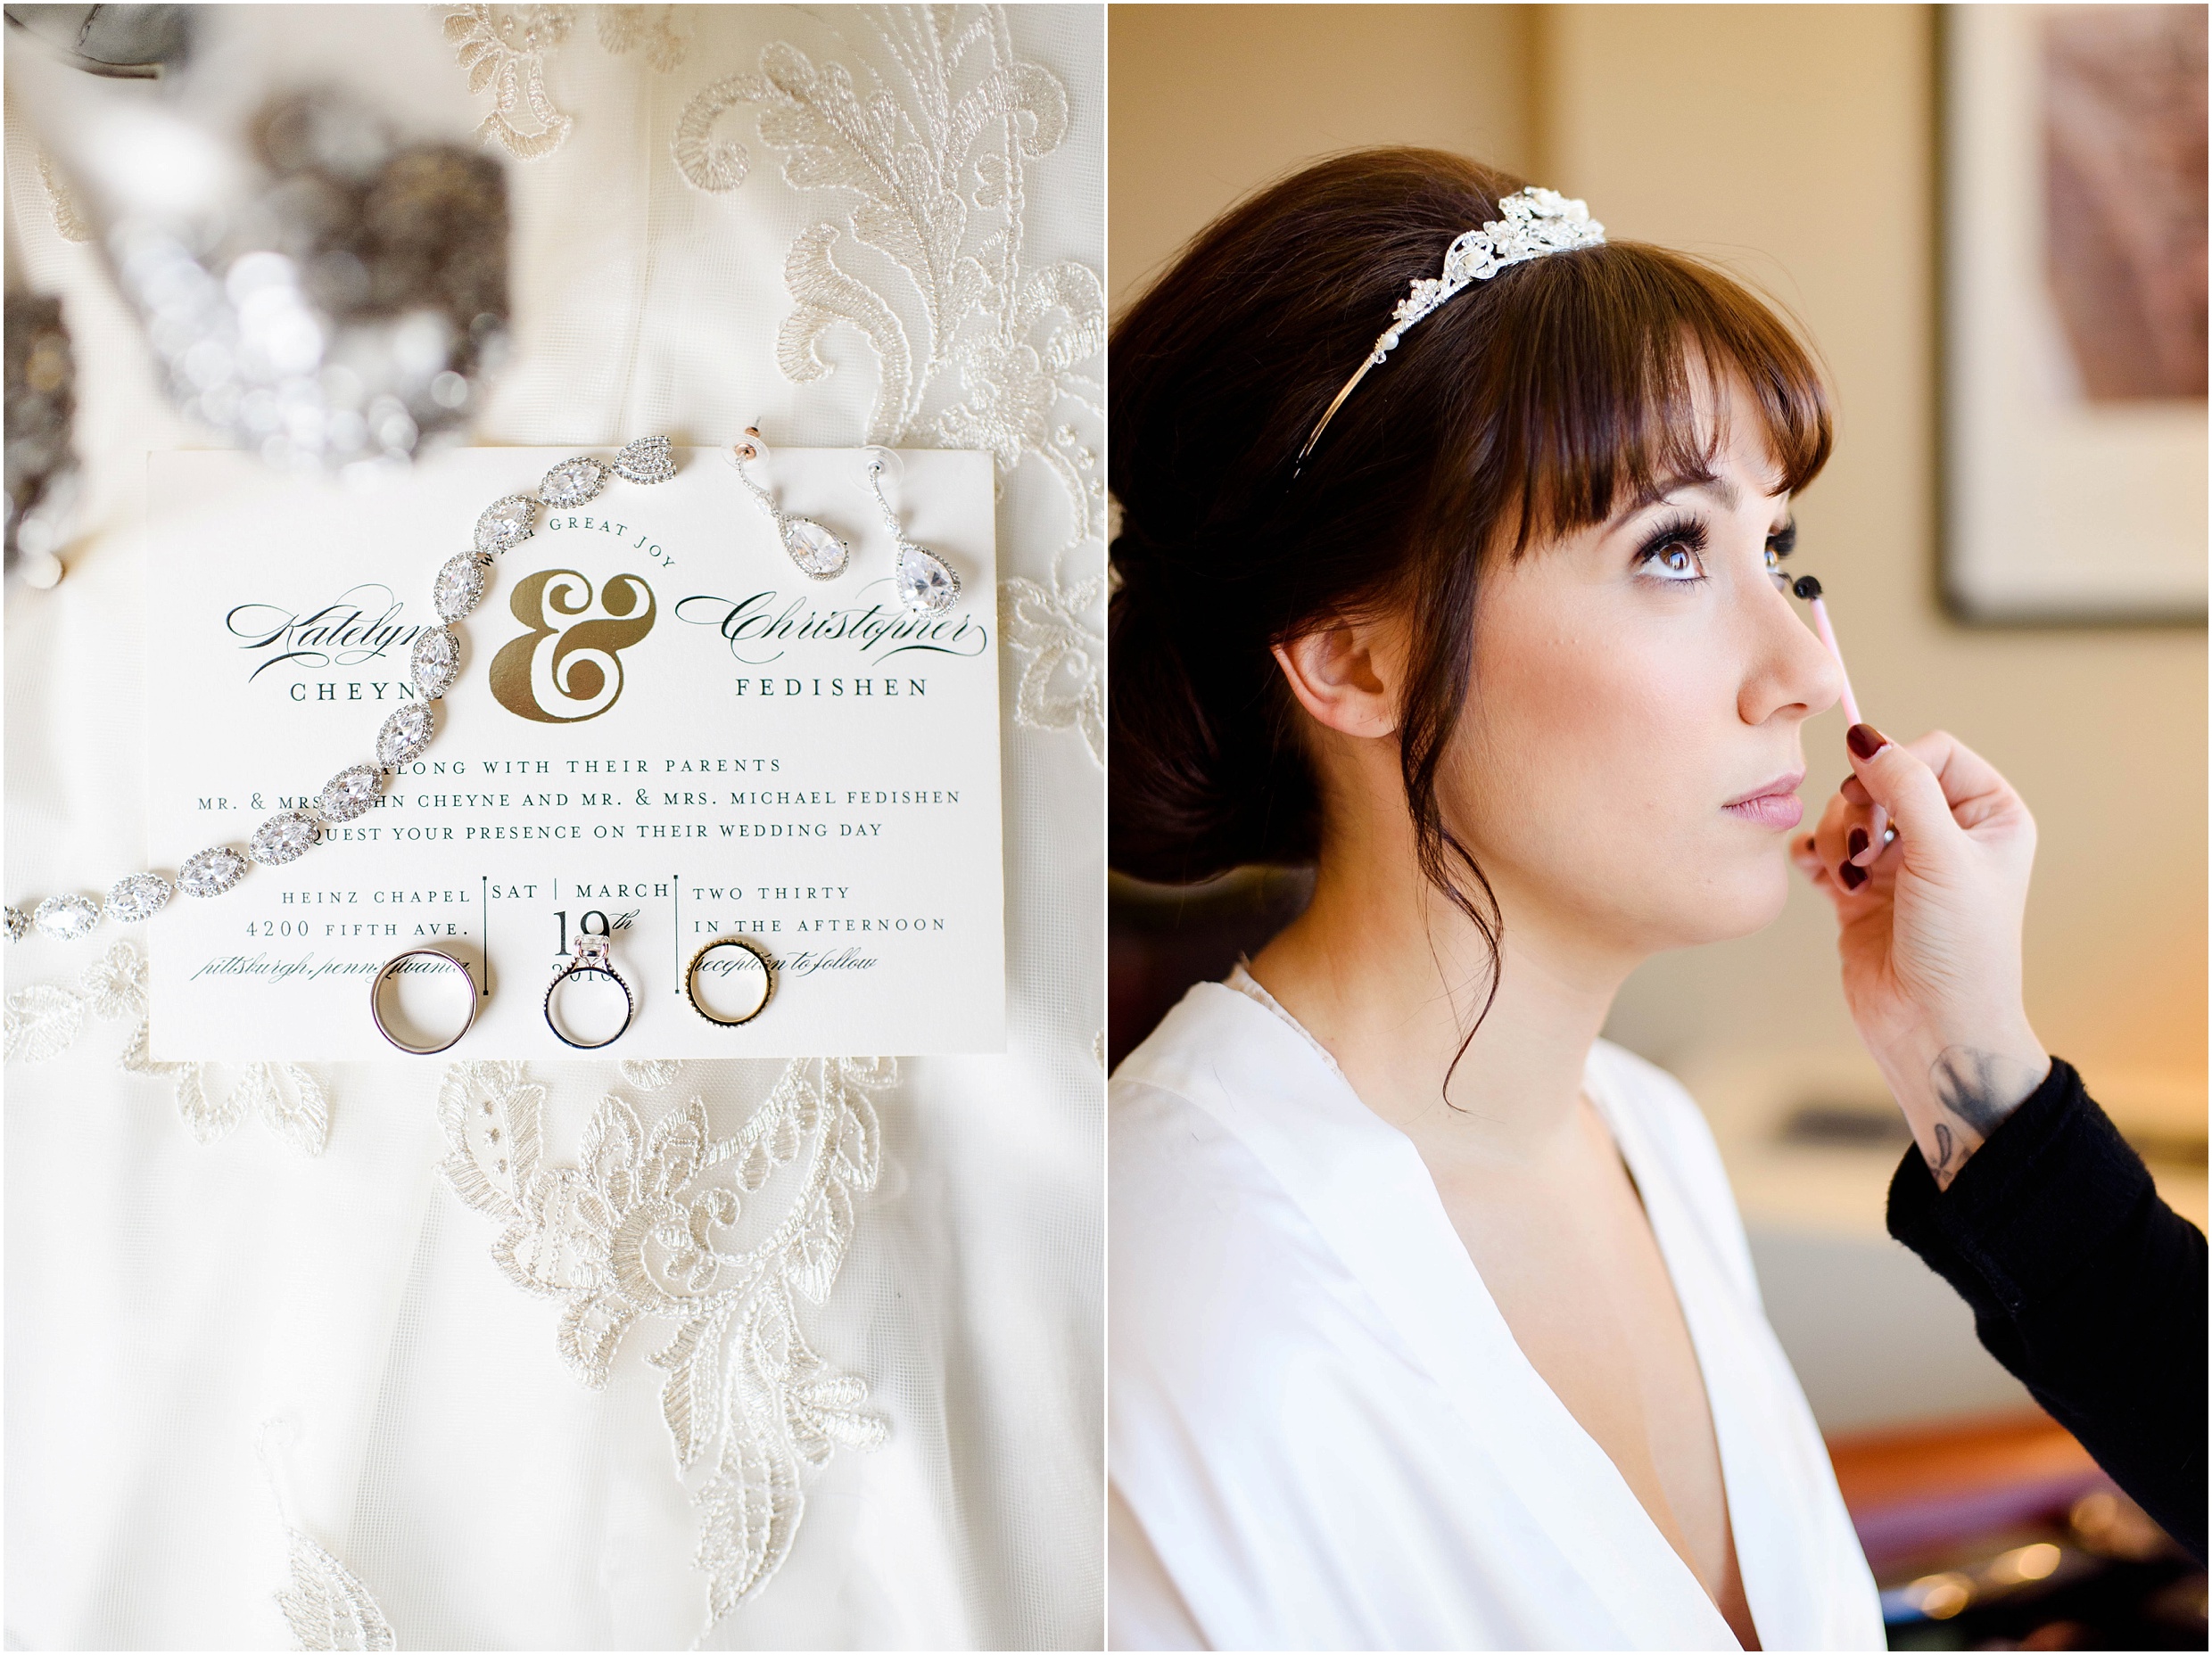 View More: http://alisonmishphotography.pass.us/kate-chris-wedding